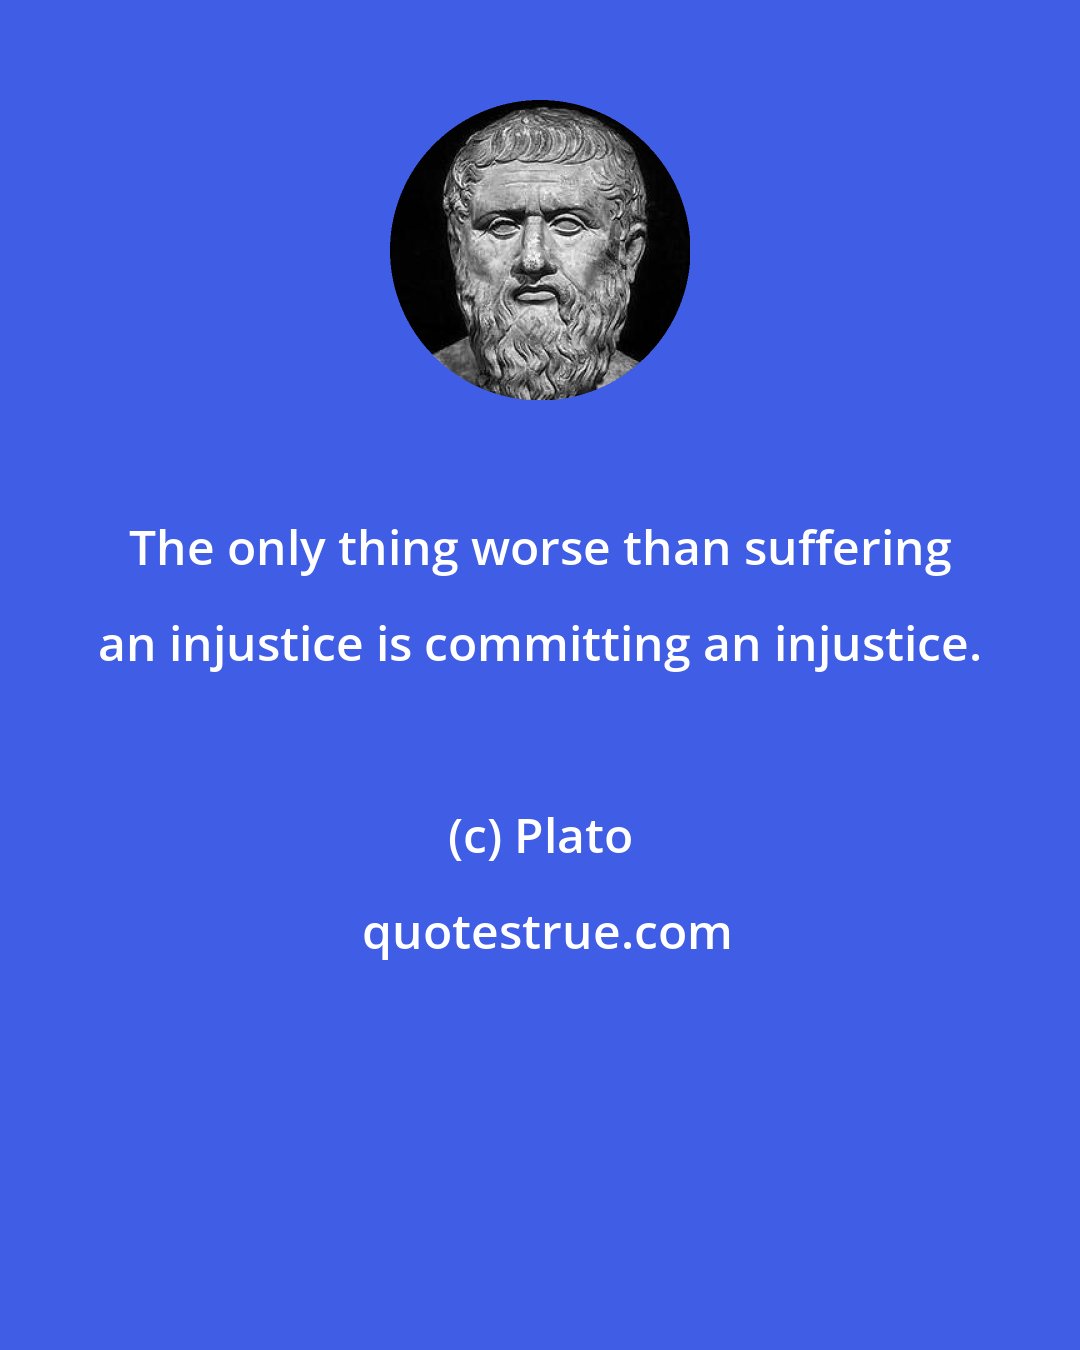 Plato: The only thing worse than suffering an injustice is committing an injustice.